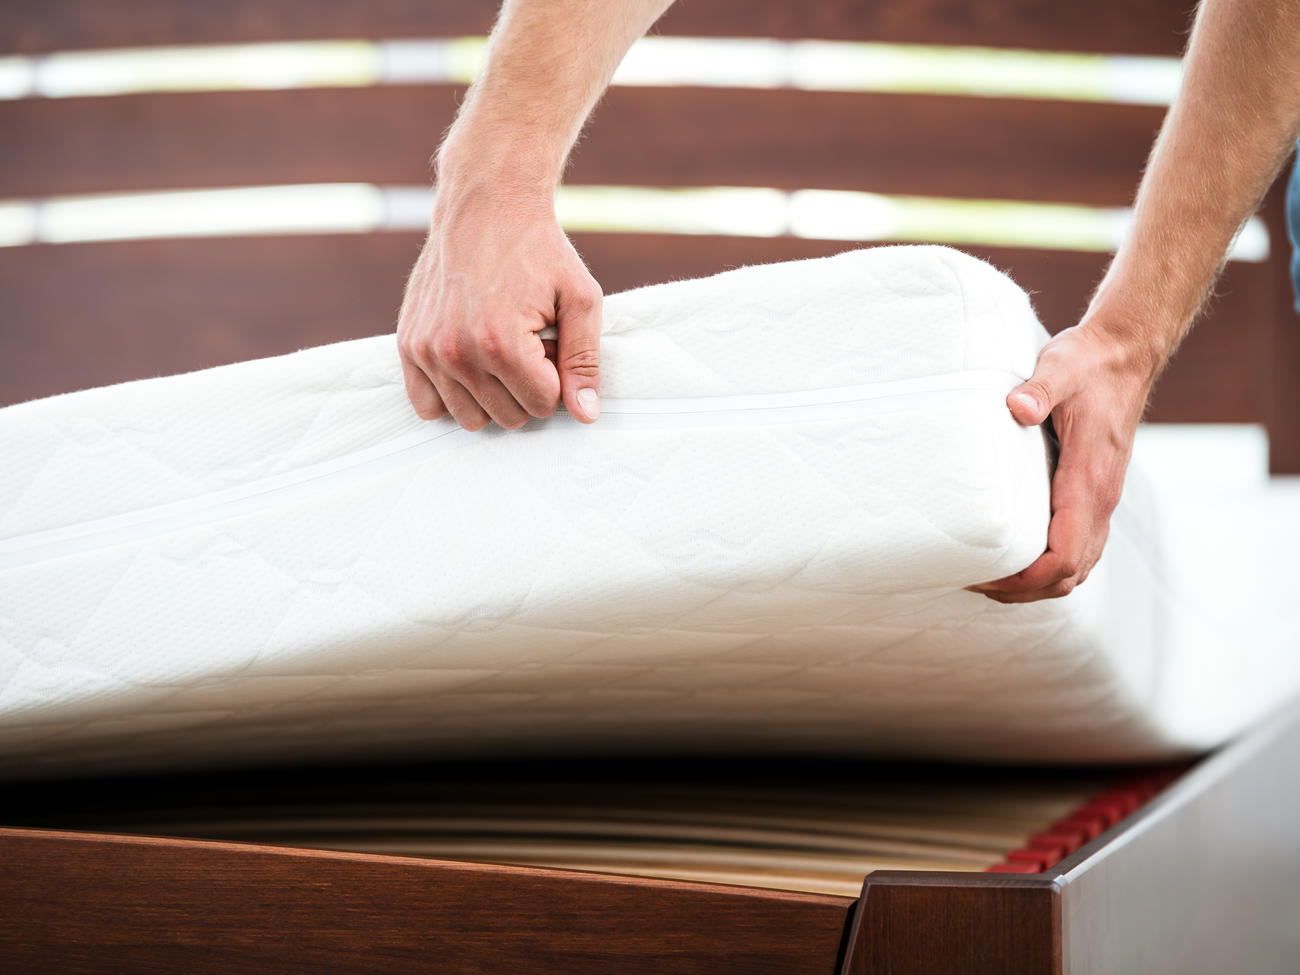 The New Mattress Craze You Need to Know About